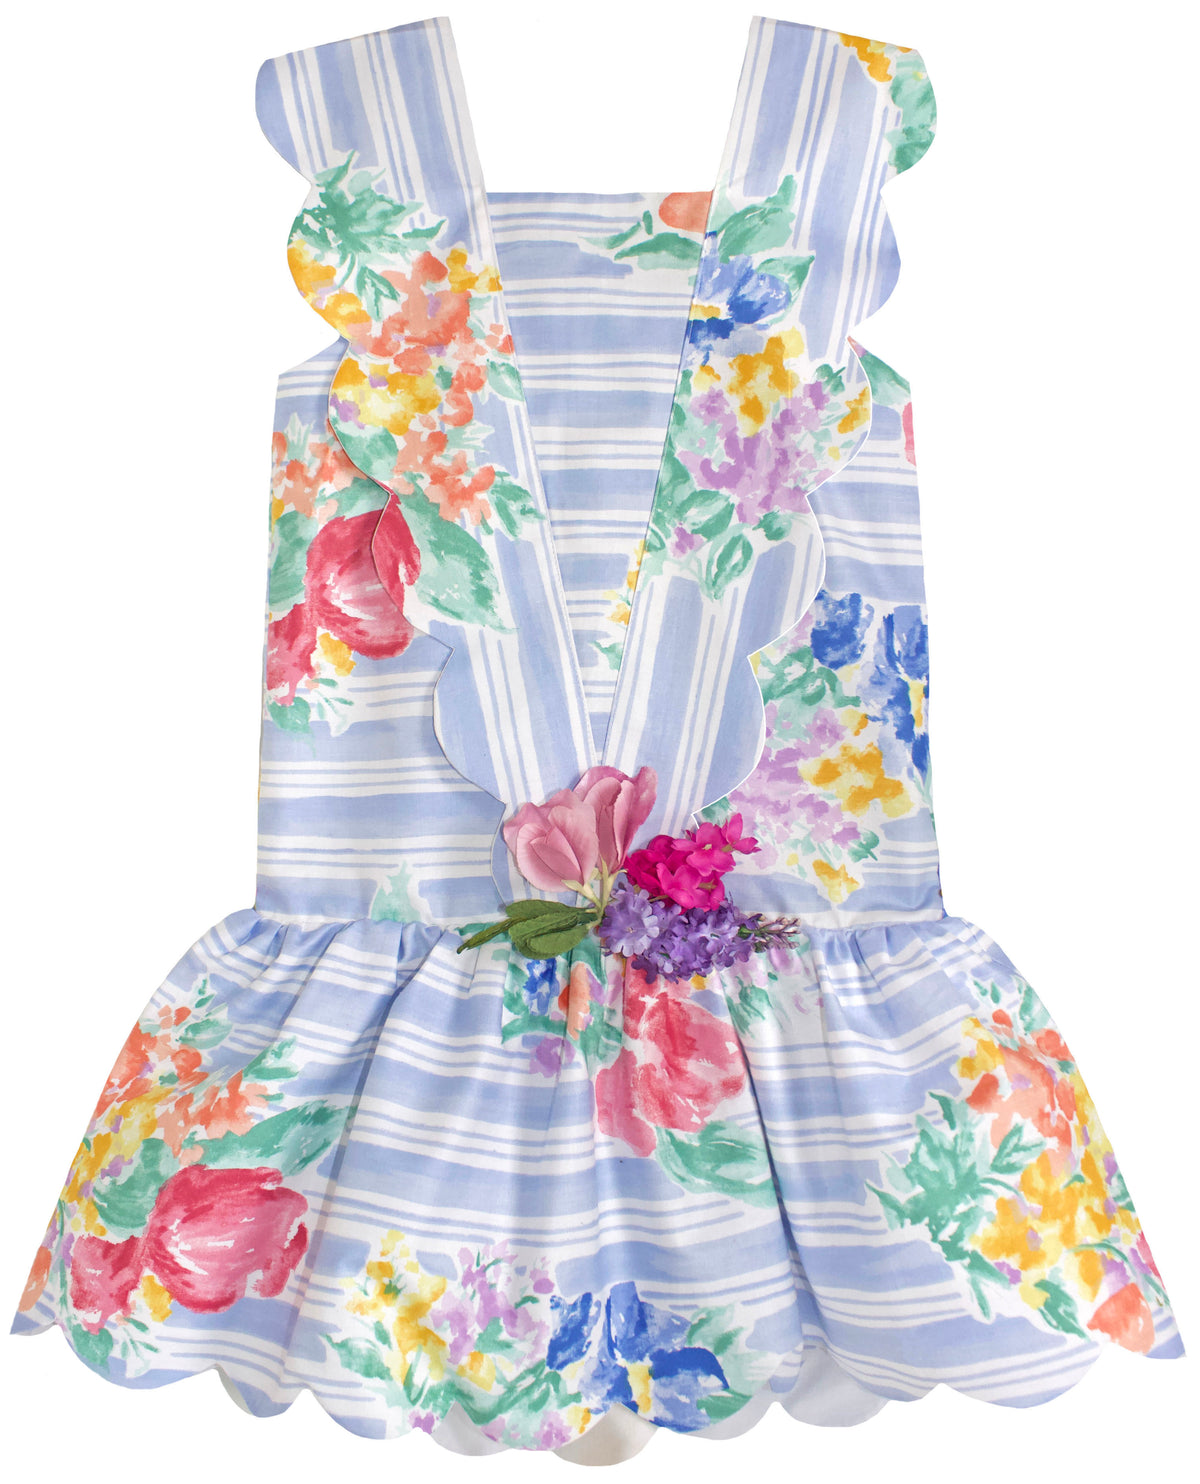 Scallop Petal Dress in French Painterly Florals